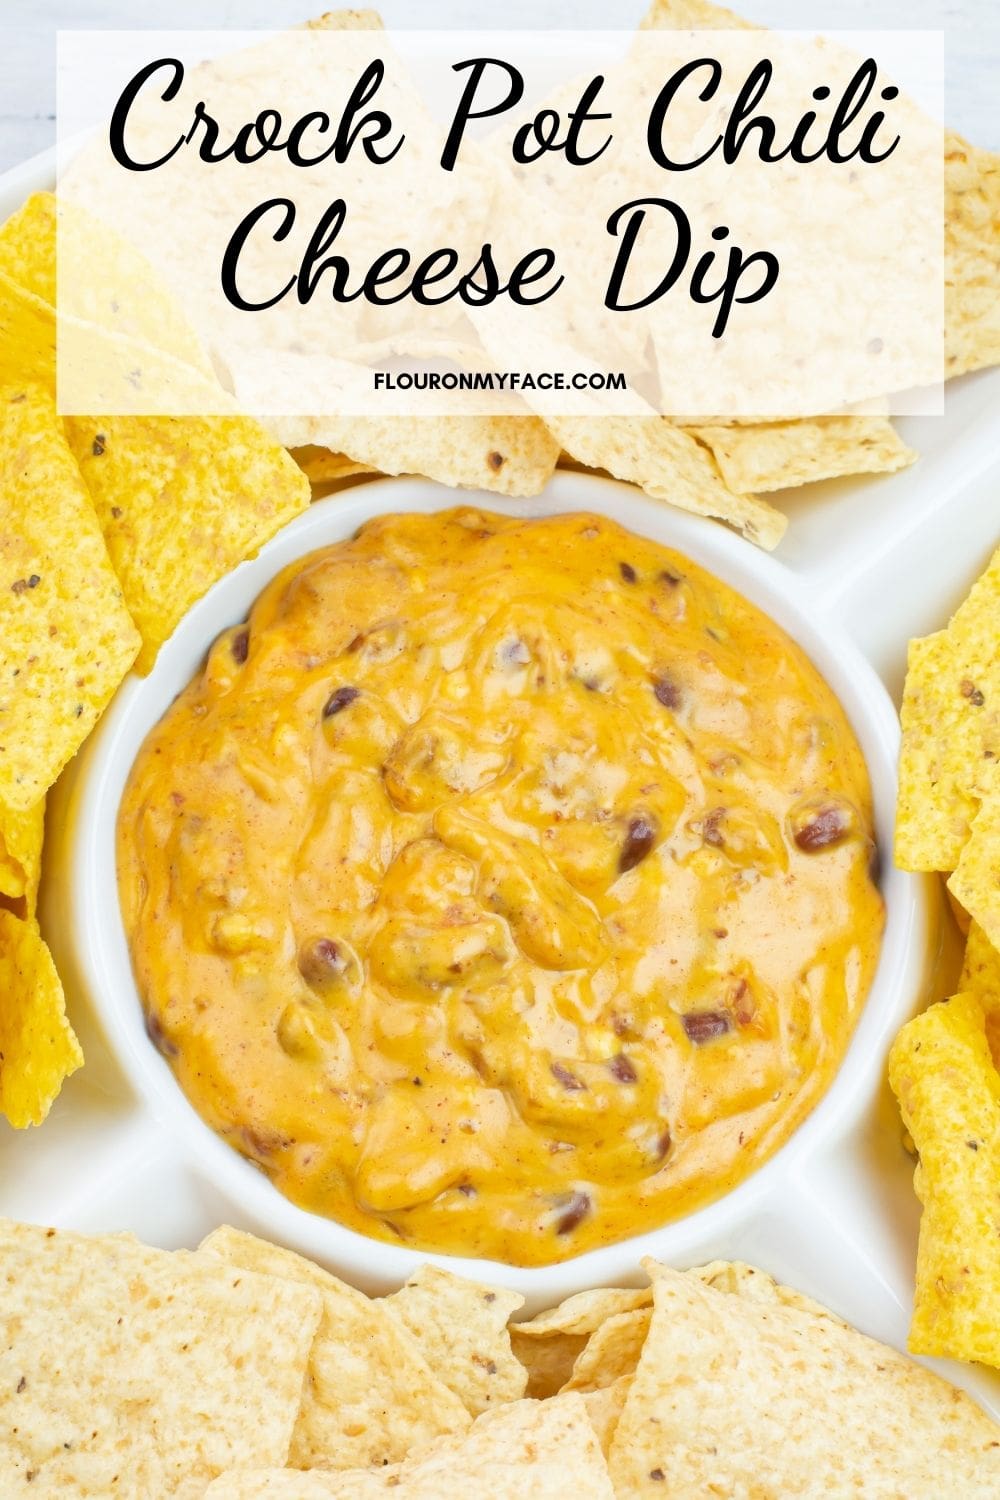 Long vertical image of a chip serving dish filled with chili cheese dip and chips.